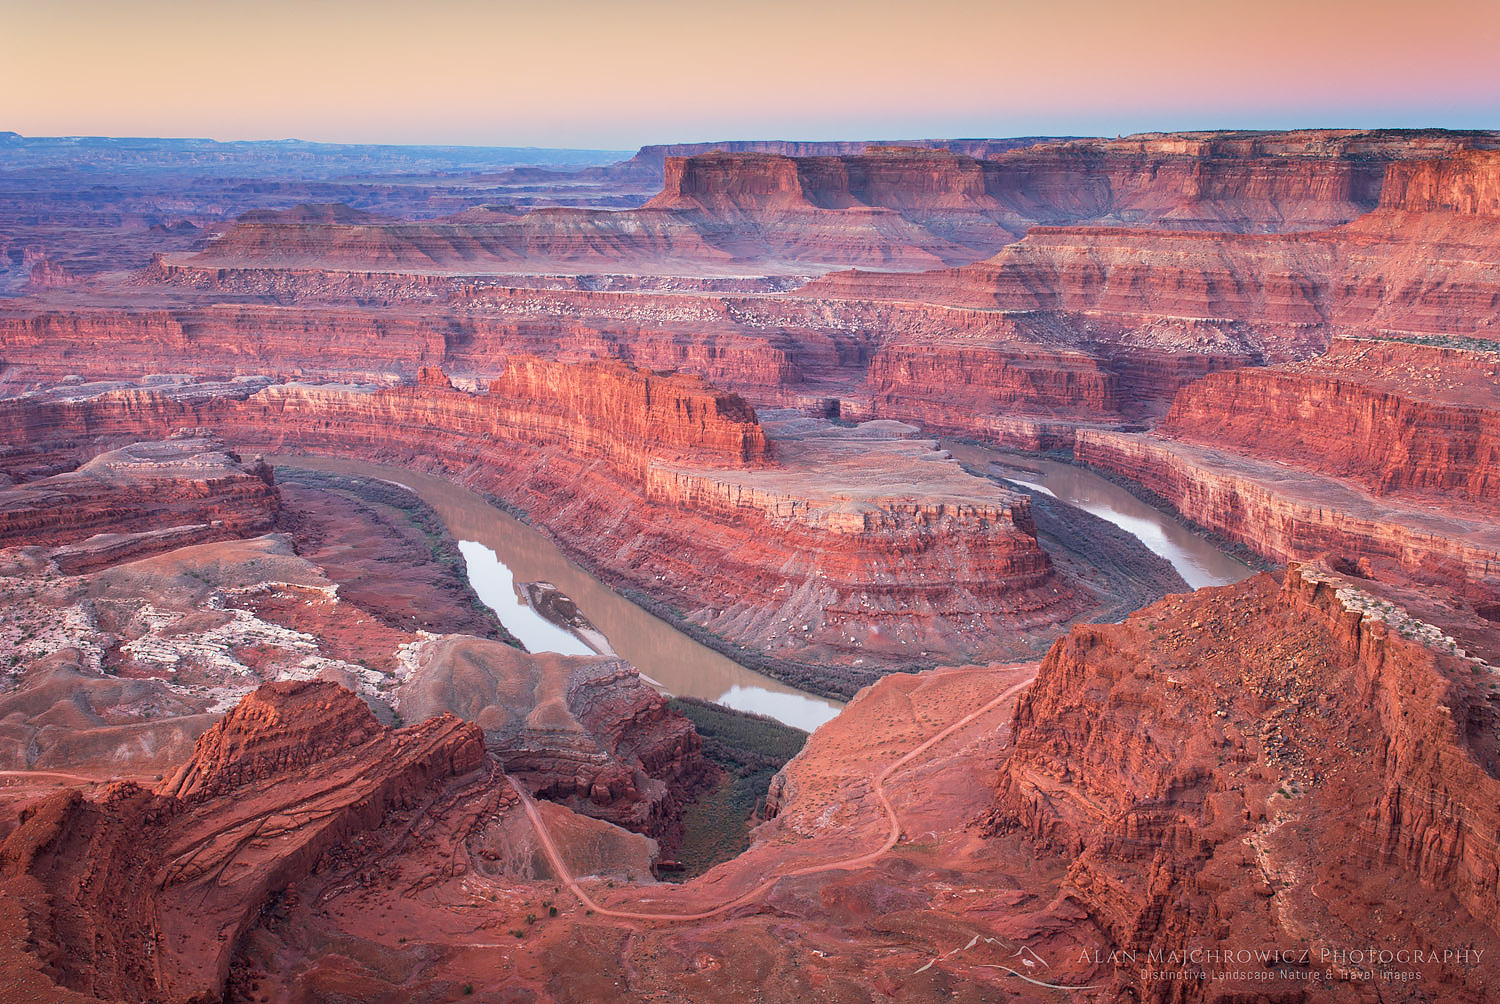 View of the Colorado River from overlook at Dead Horse Point State Park Utah at dusk #40242